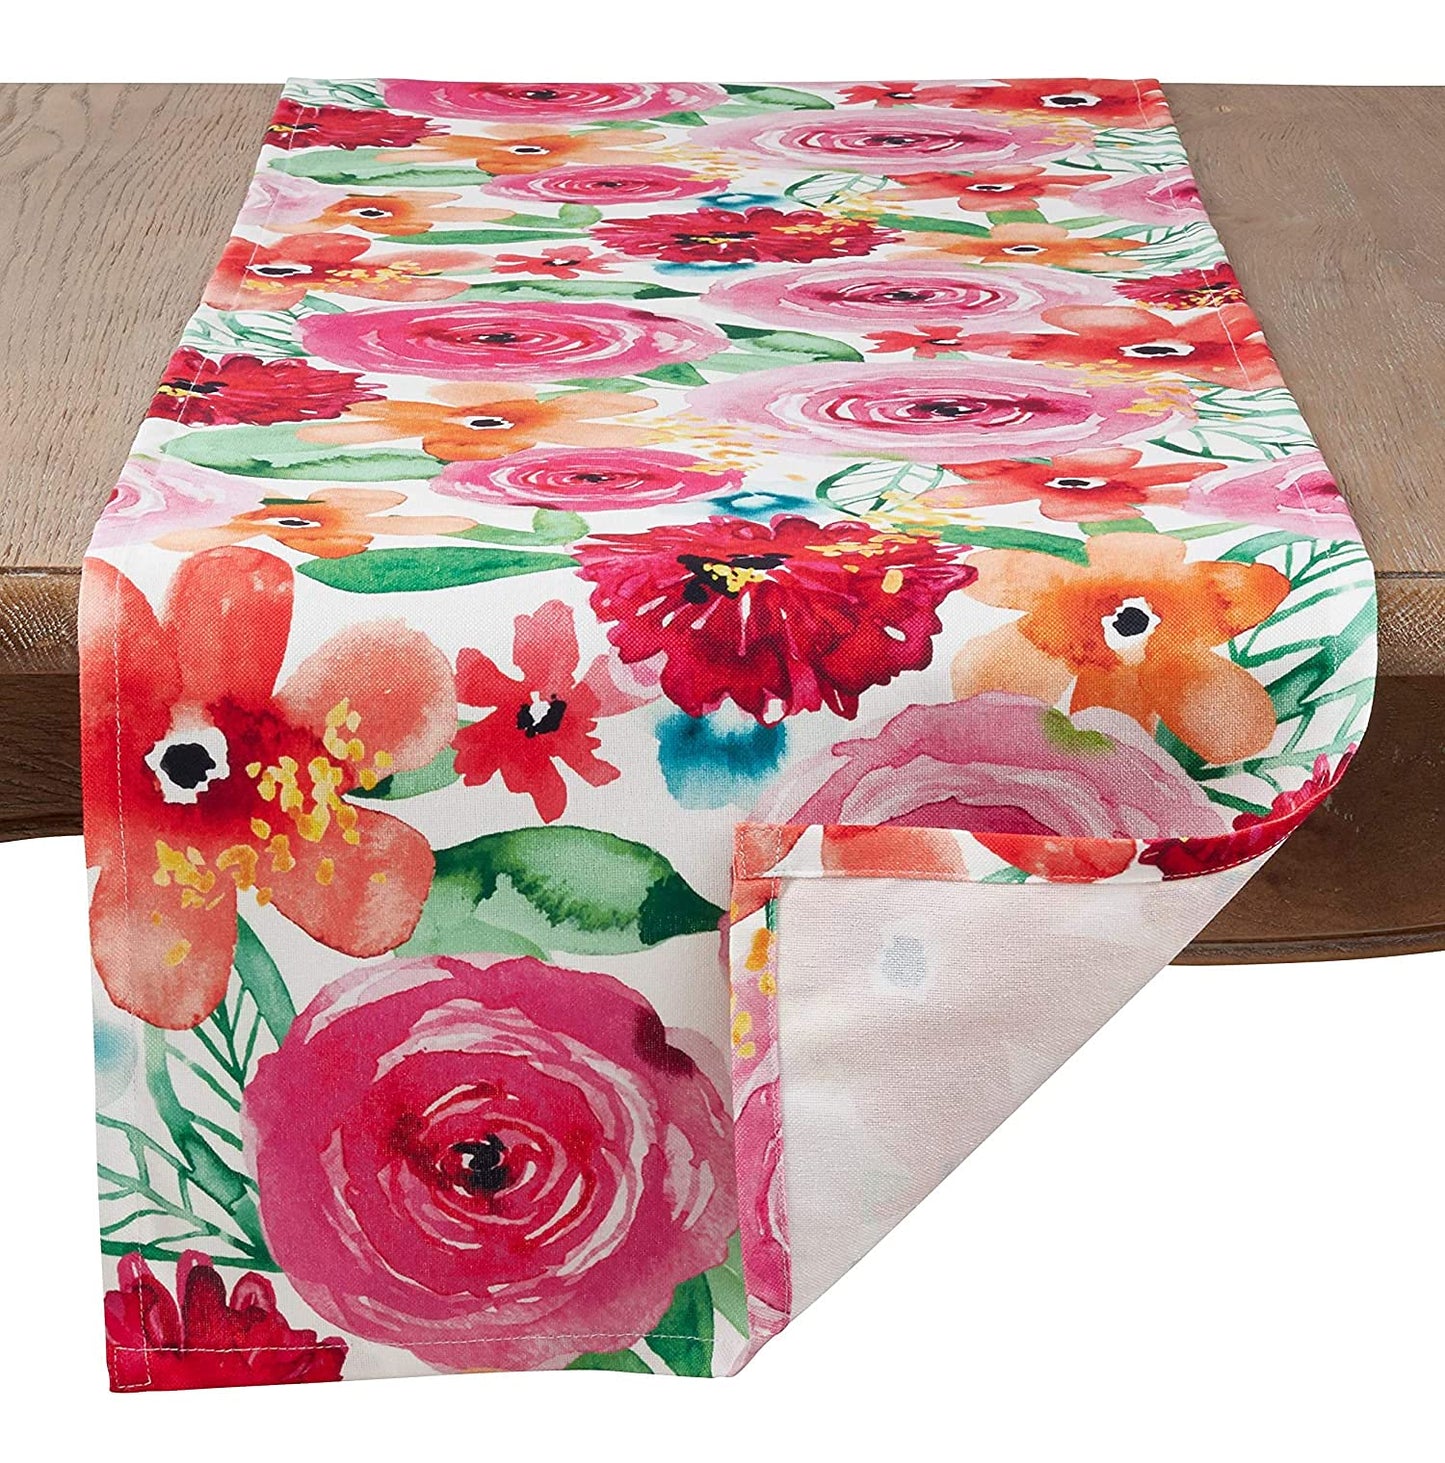 Fennco Styles Santa Monica Floral Table Runner 16" W x 72" L - Multicolored Flower Rectangular Table Cover for Home Décor, Dining Table, Banquet, Family Gathering and Special Occasion